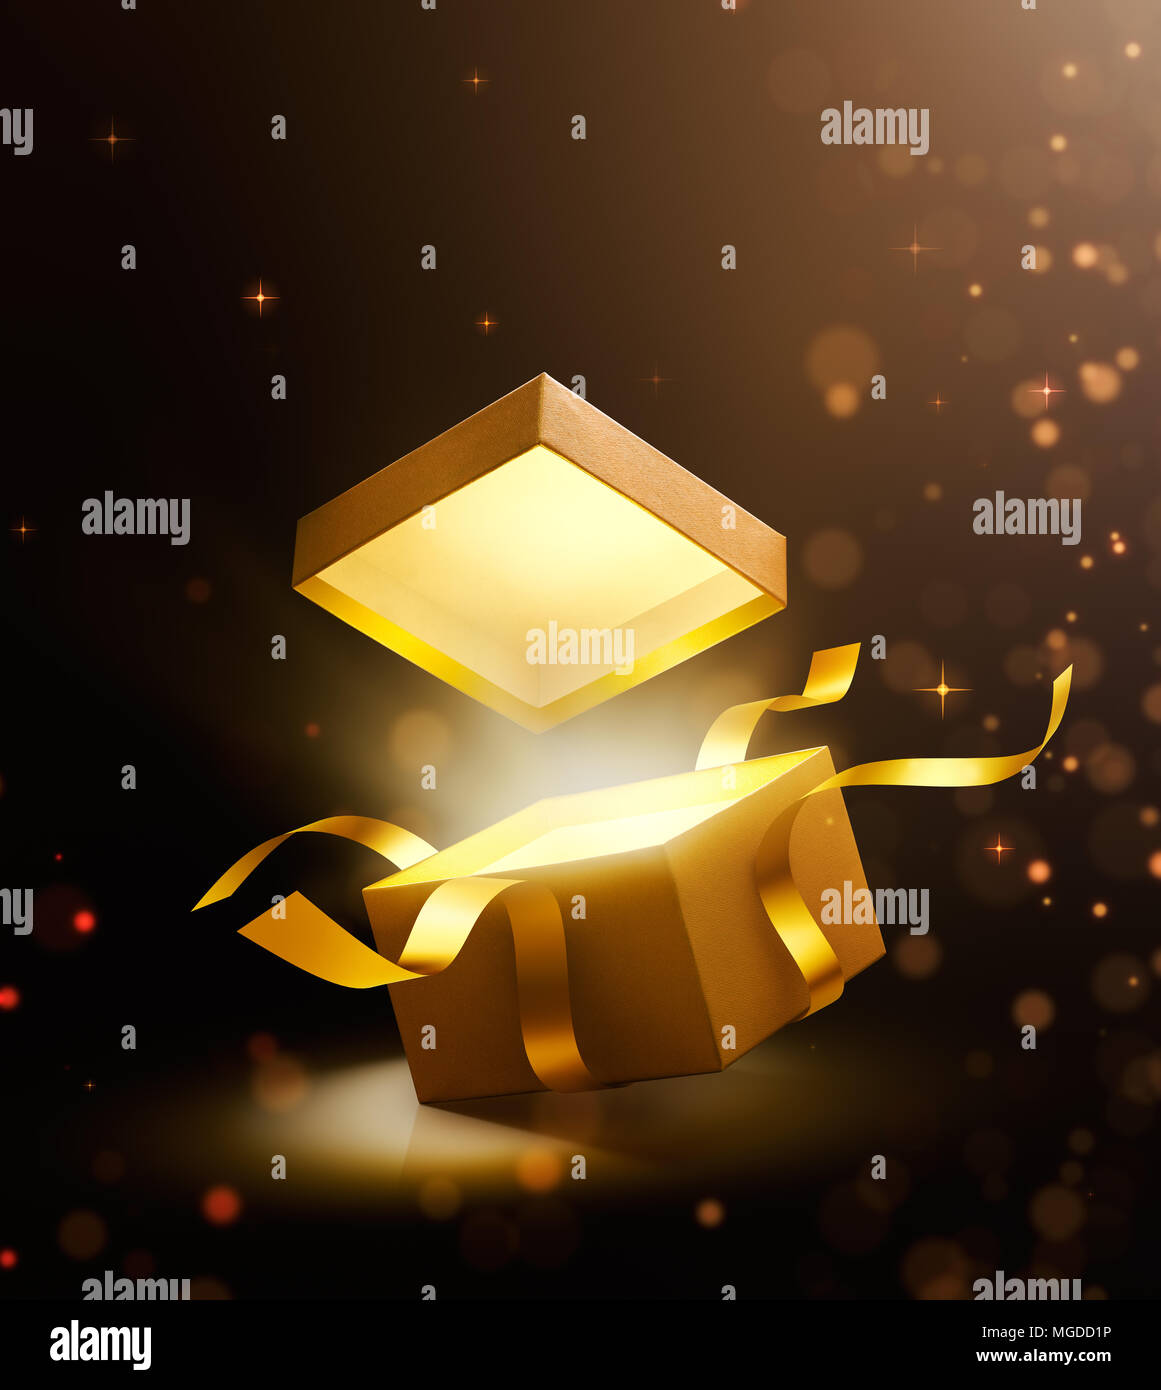 Gold open gift box with magical light Stock Photo